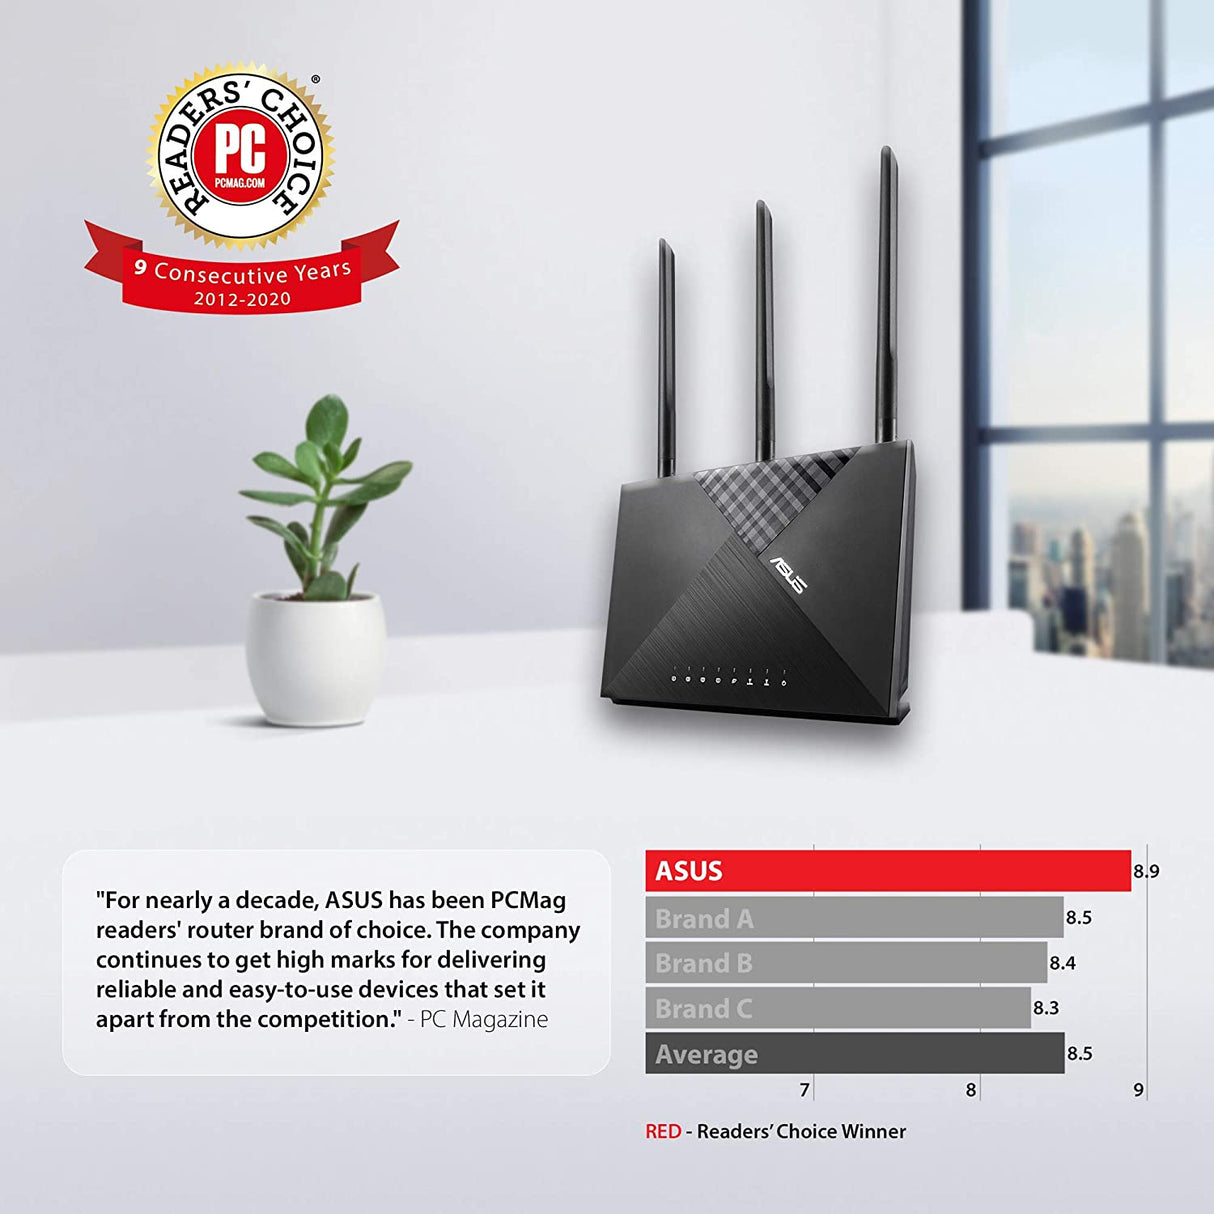 ASUS AC1750 WiFi Router (RT-AC65) - Dual Band Wireless Internet Router, Easy Setup, Parental Control, USB 3.0, AiRadar Beamforming Technology extends Speed, Stability &amp; Coverage, MU-MIMO